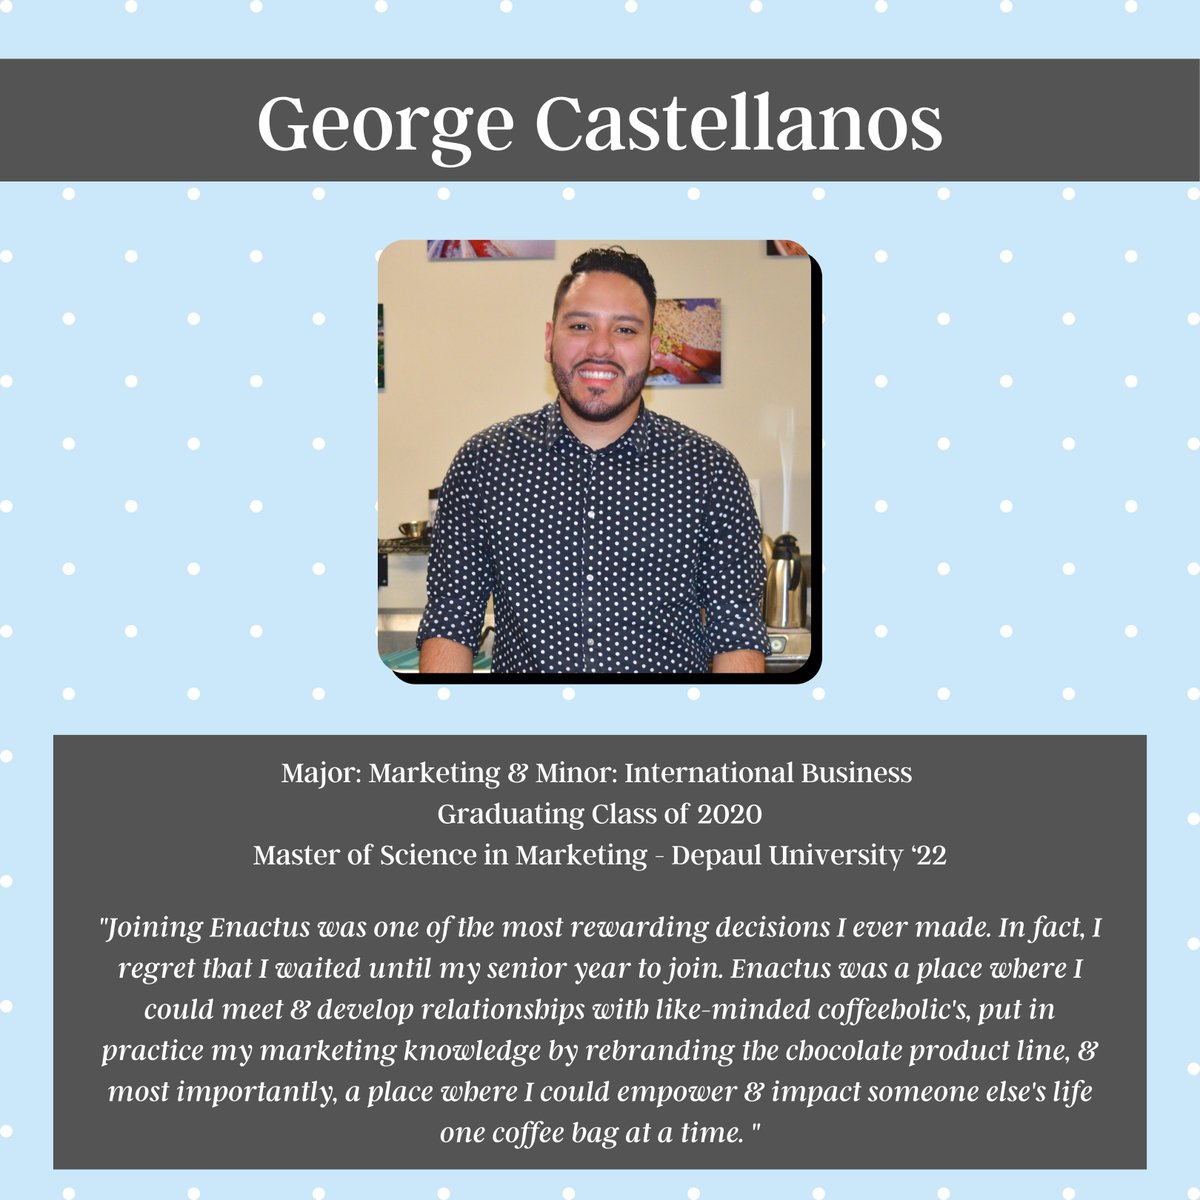 Next up is alum @IMCastellanosG! Currently, he's a Marketing Manager at Innovative Dental Partners, an award-winning multi-specialty dental corporation in Naperville, IL. He'S also starting his own coffee brand from his motherland, Honduras that will be roasted in our coffee lab.